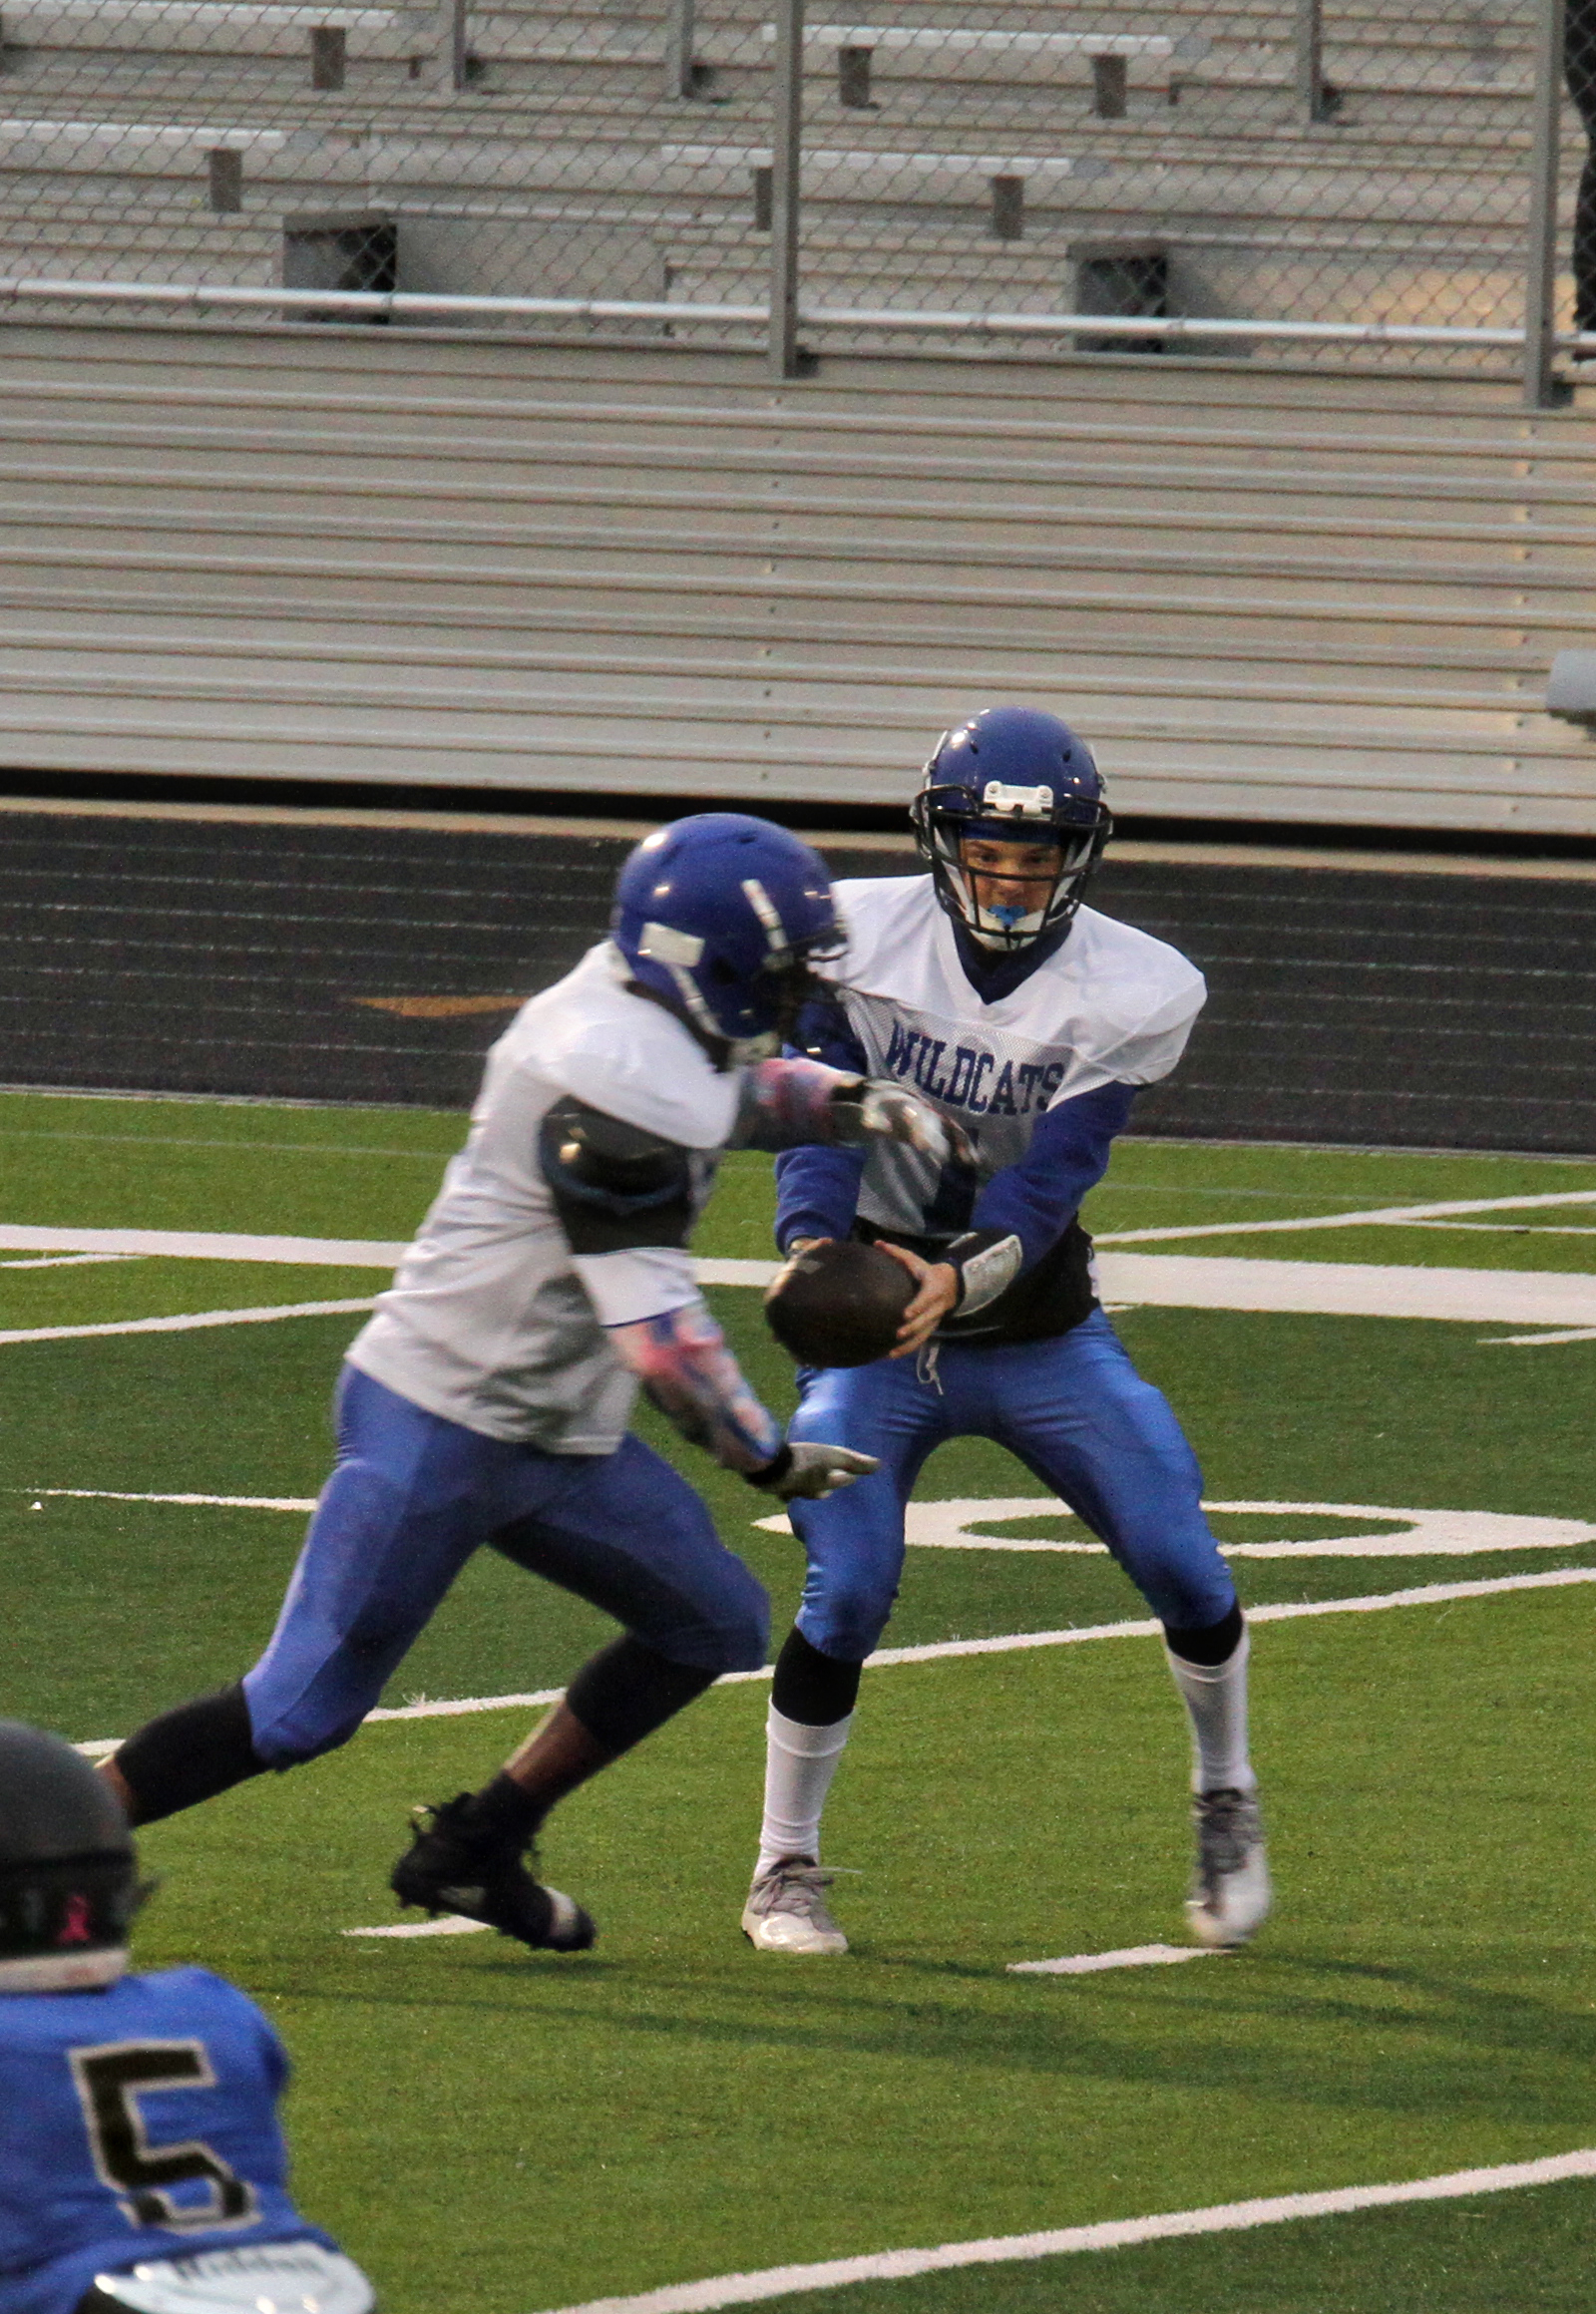 Undefeated North Forney Falls to the Freshman Wildcats in a shut out